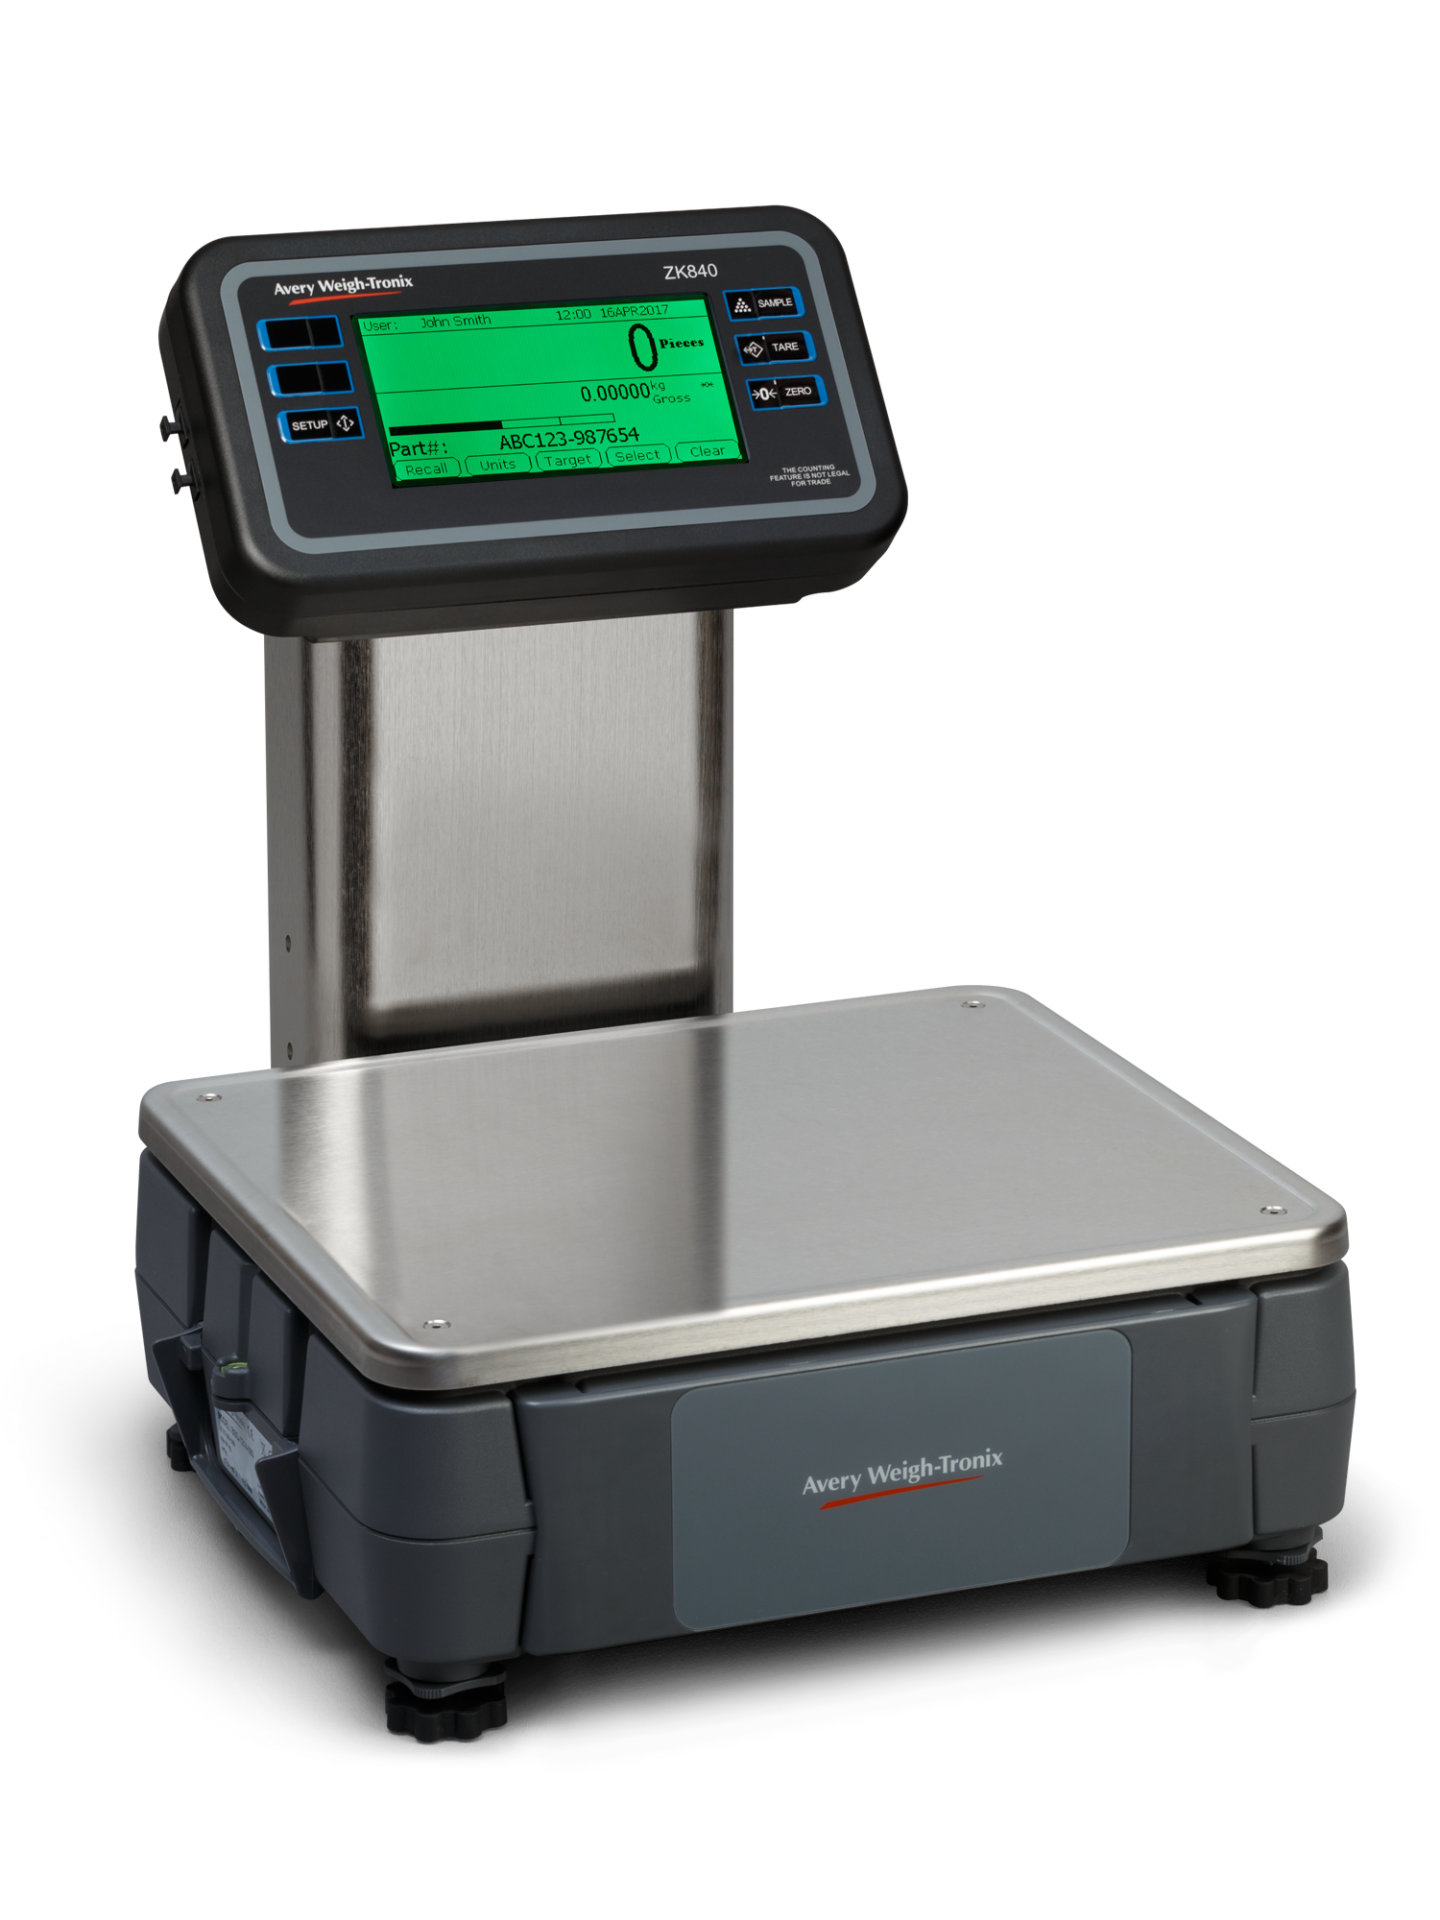 Weightman Software for Weighing Scales